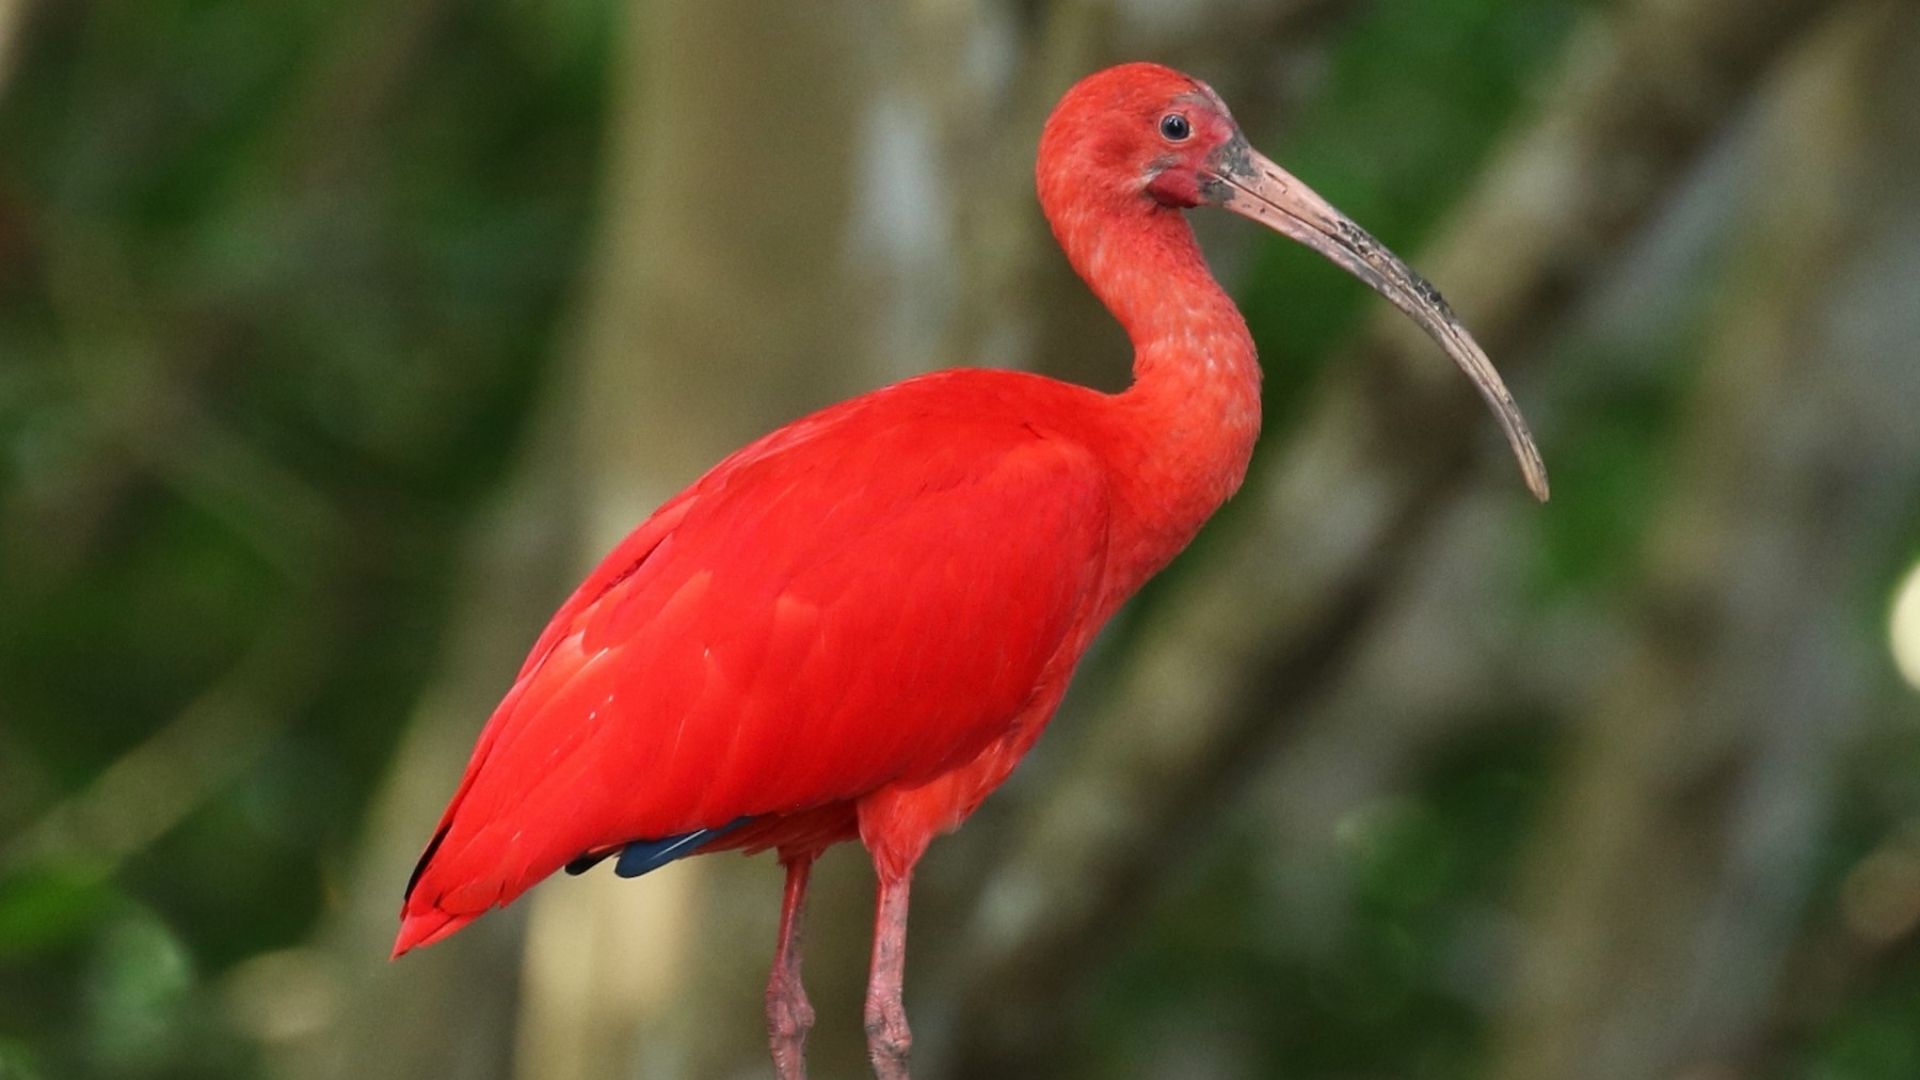 Episode 590 Stories The Scarlet Ibis by James Hurst